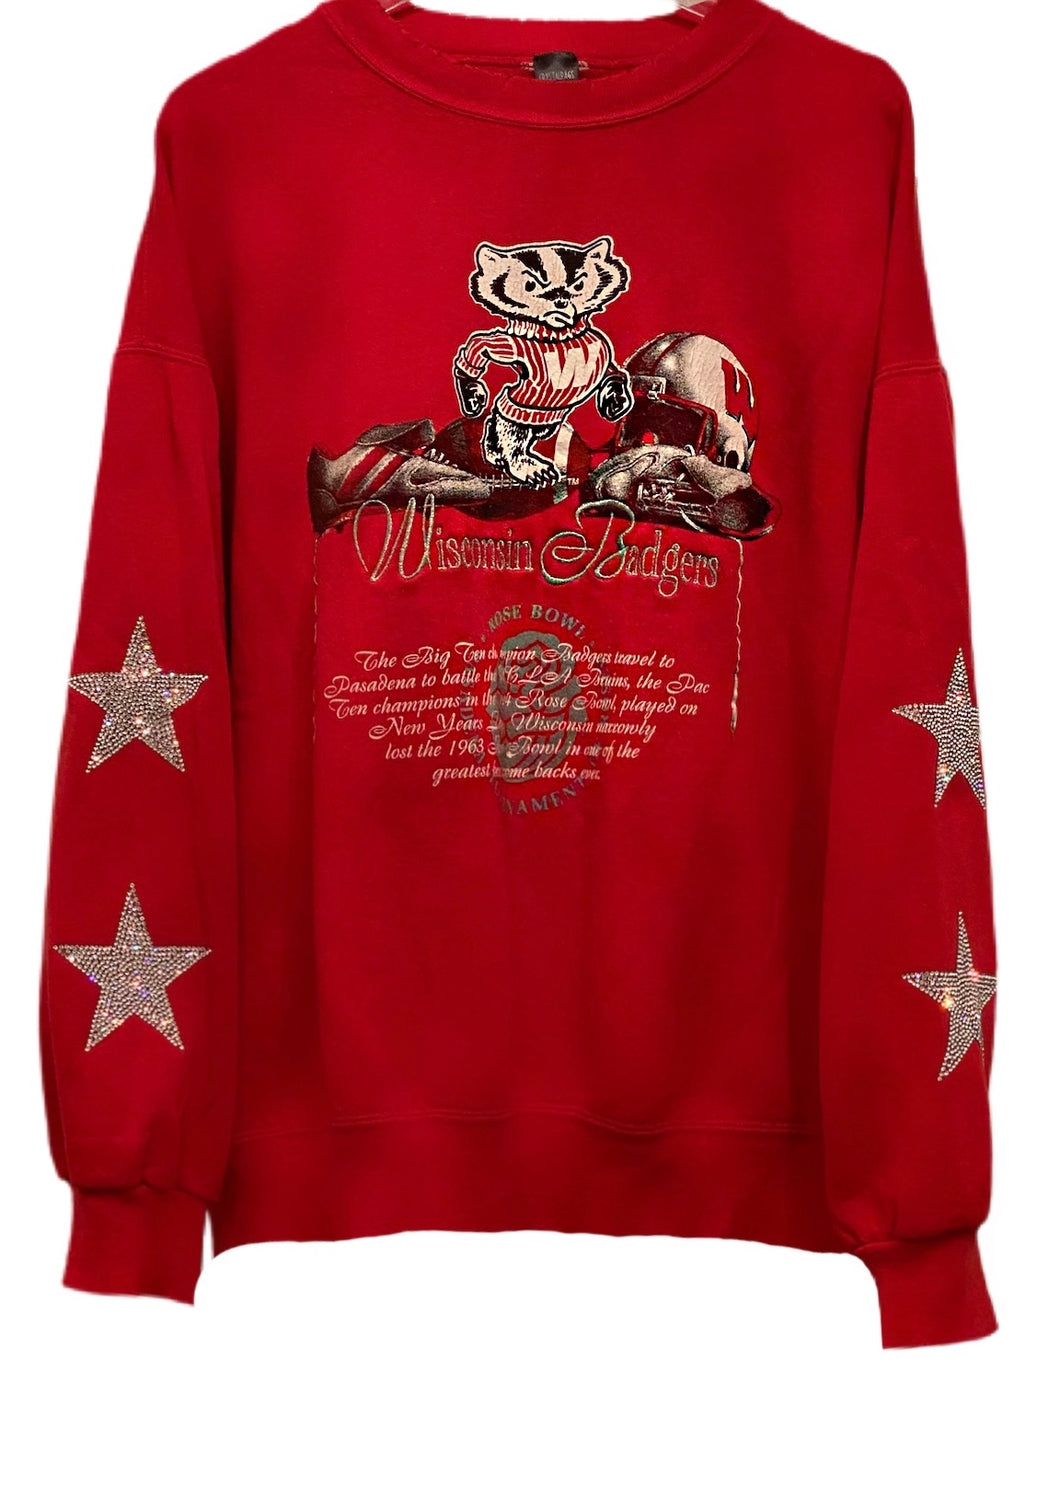 University of Wisconsin, Badgers One of a KIND Vintage Sweatshirt with Crystal Star Design